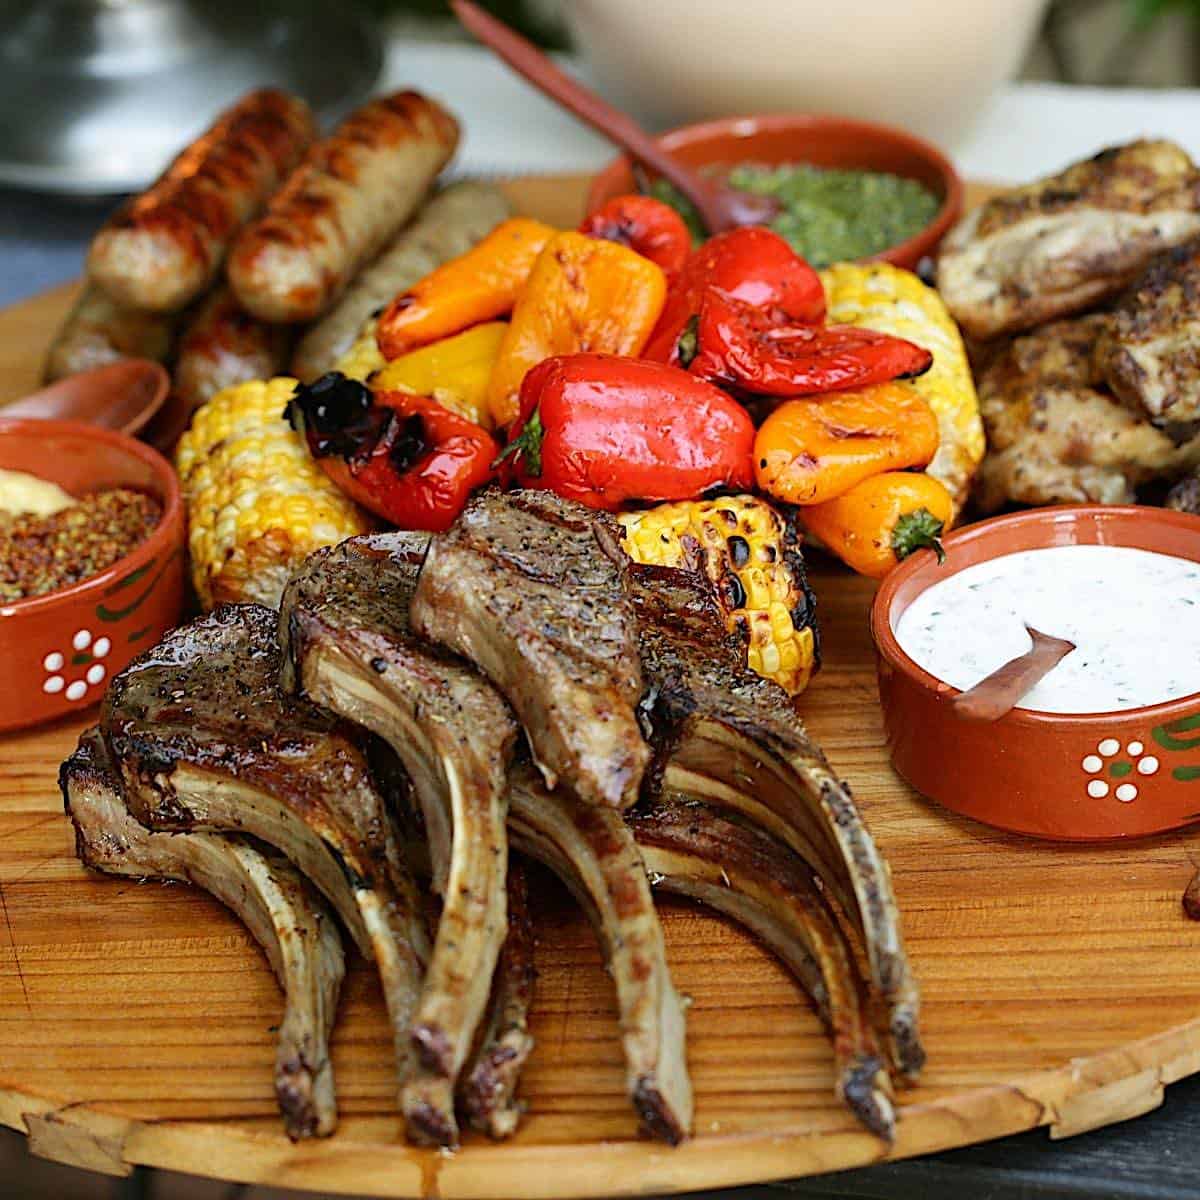 How-To Host a Mixed Grill Party